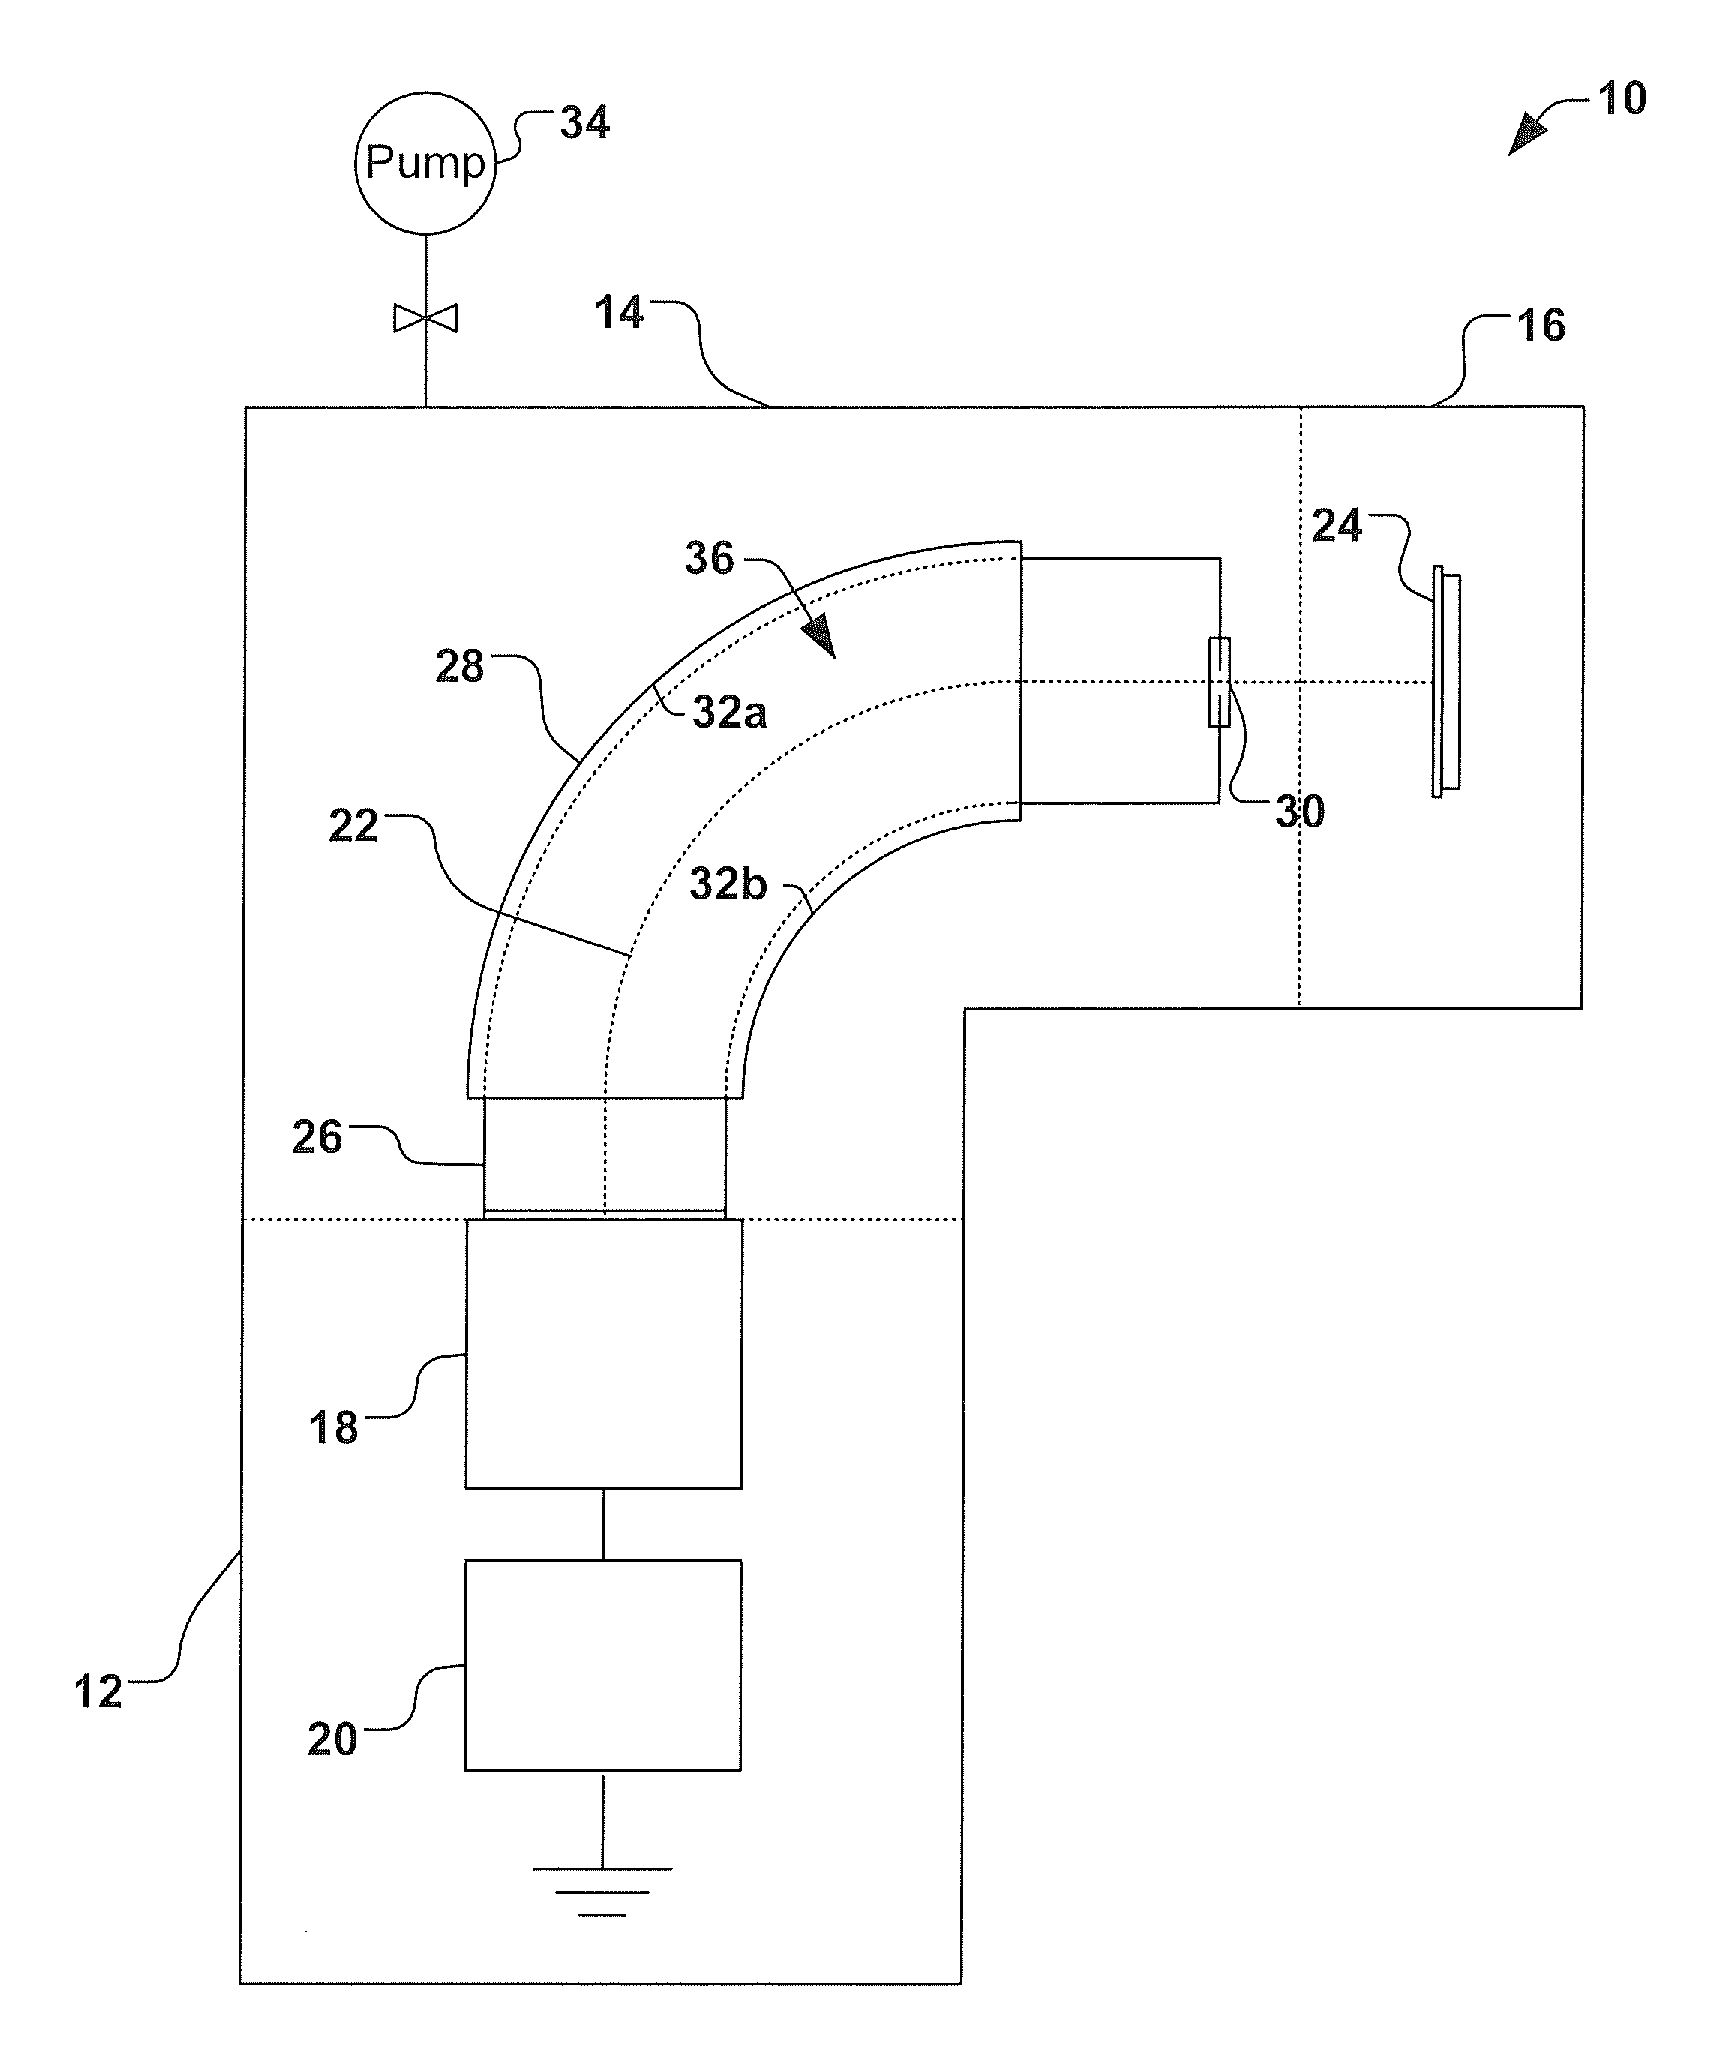 Method and apparatus for cleaning residue from an ion source component